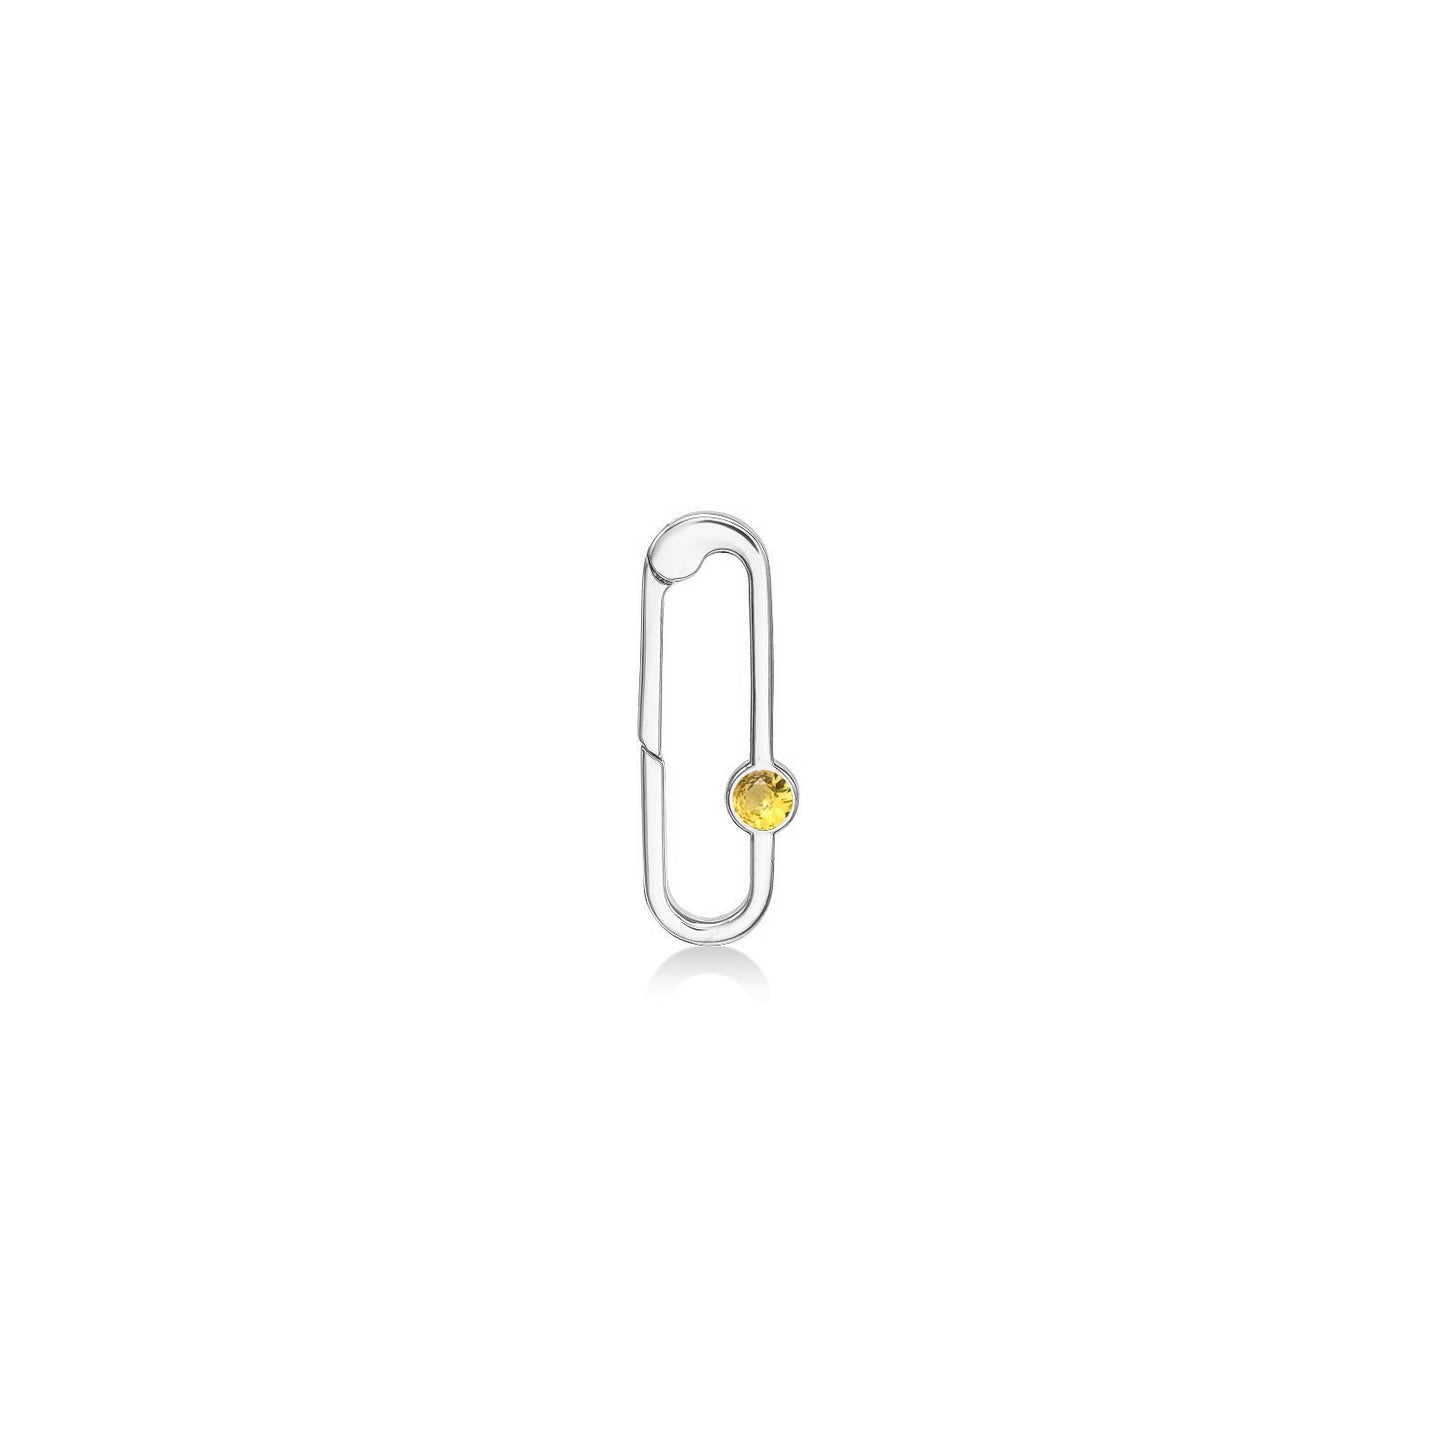 14k white gold paperclip charm lock with yellow topaz